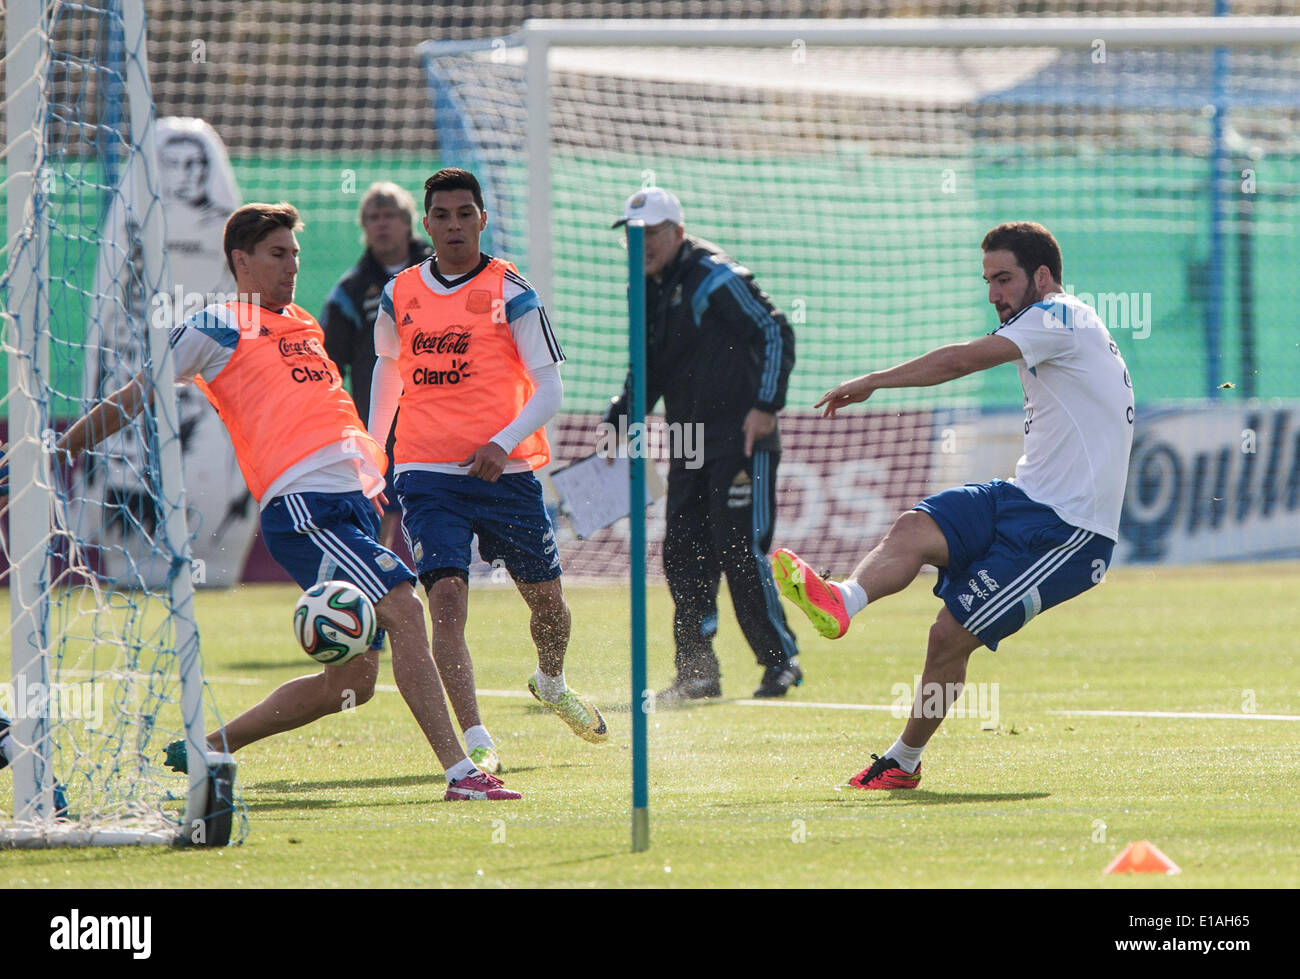 Ezeiza. 28th May, 2014. Argentina's national soccer team players Gonzalo Higuain (R) and Federico Fernandez (L) take part in a training session in Ezeiza City May 28, 2014. Argentina will face Trinidad and Tobago and Slovenia in friendly matches prior to the FIFA World Cup Brazil 2014, to be held from June 12 to July 13. © Martin Zabala/Xinhua/Alamy Live News Stock Photo